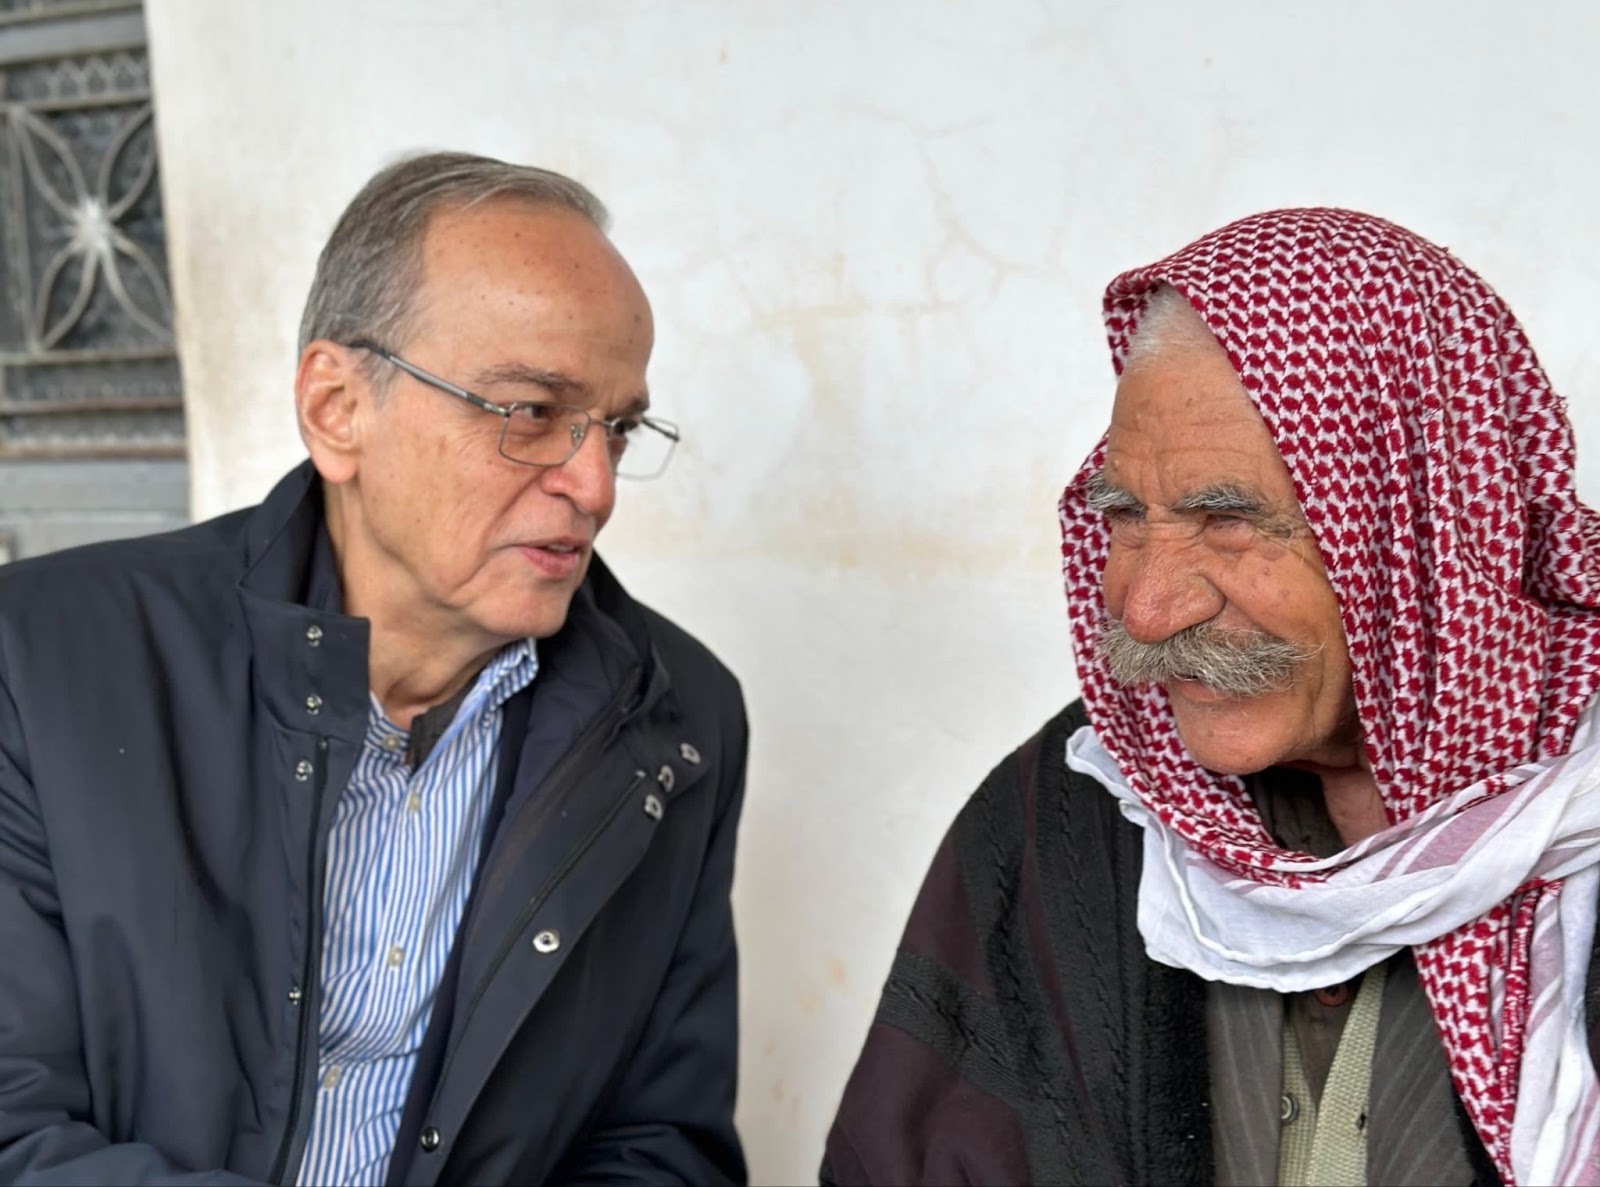 President of the Syrian Opposition Coalition (SOC), Hadi Al-Bahra, engaged with the residents of Burj Abdallo village in the Afrin countryside, attentively listening to their concerns and needs, particularly regarding water provision and management.